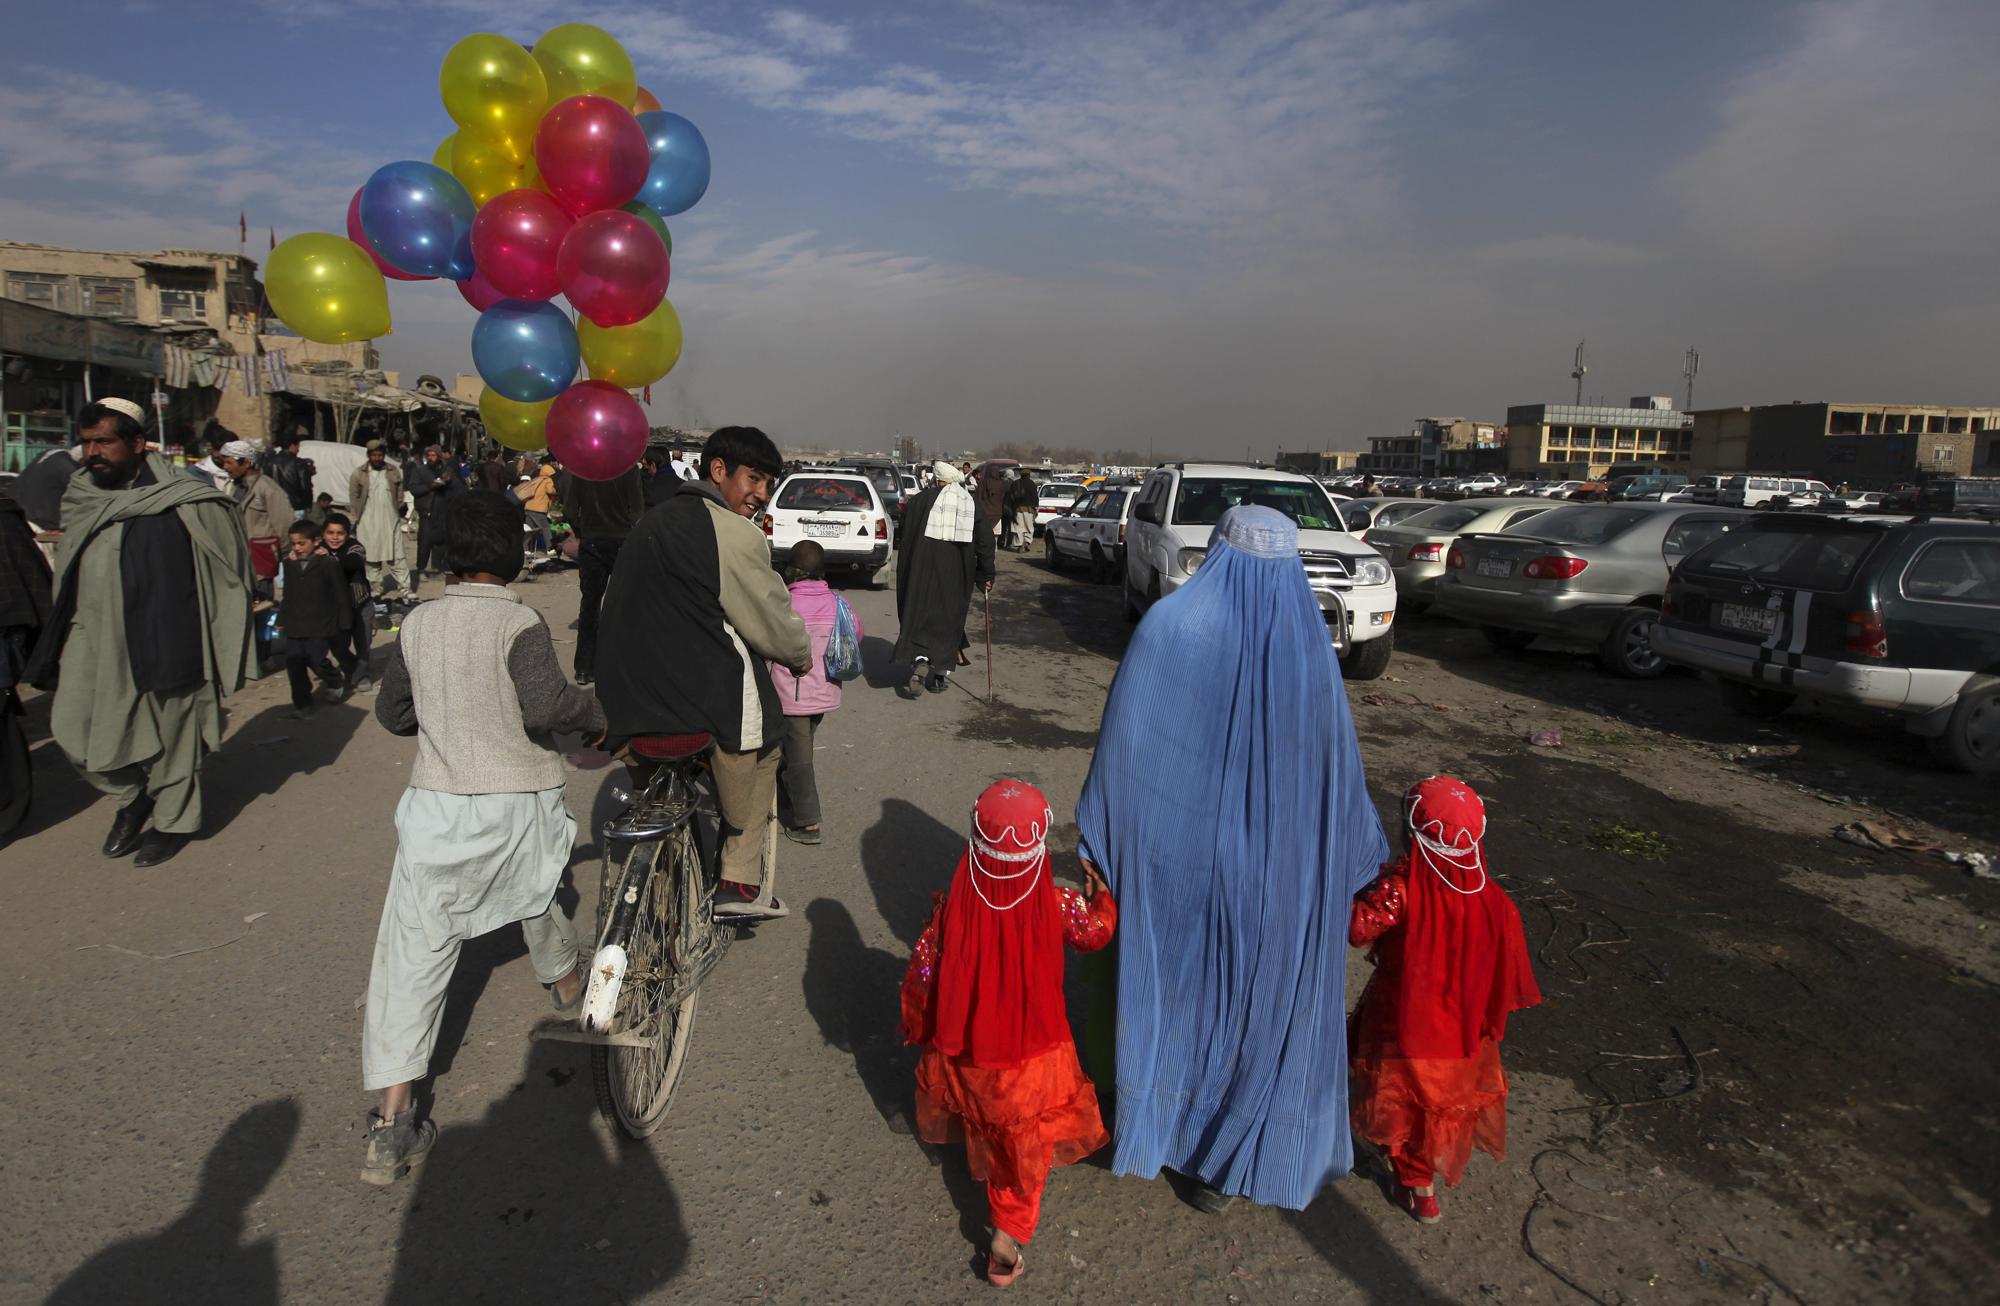 A balloon seller riding a bicycle looks towards a woman holding hands with two young girls, Jan. 3, 2011, at a market in Kabul, Afghanistan.